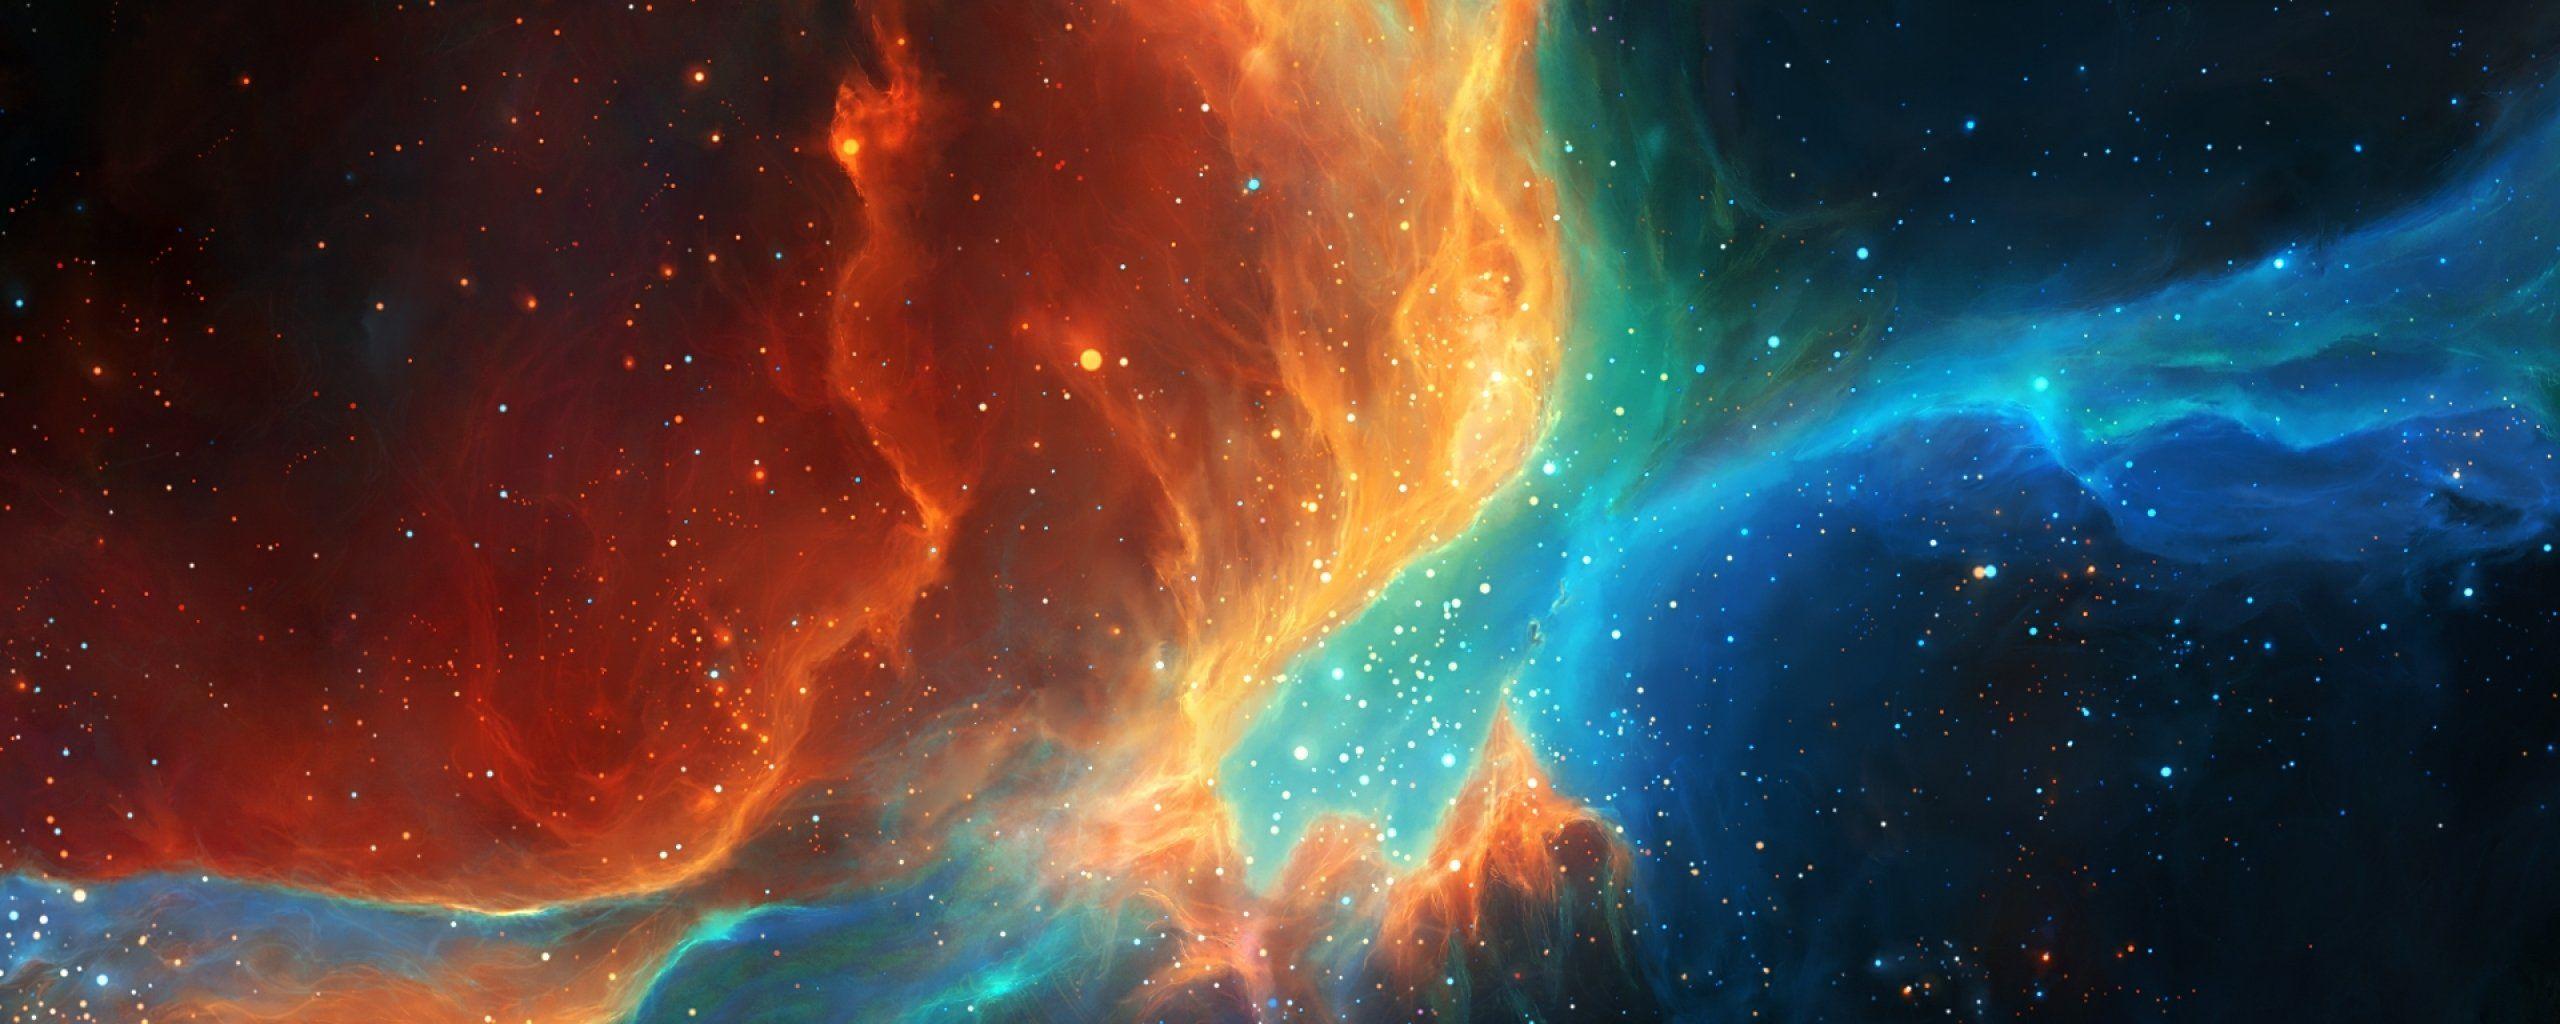 Space Wallpapers Dual Monitor Space Wallpaper Hd - vrogue.co